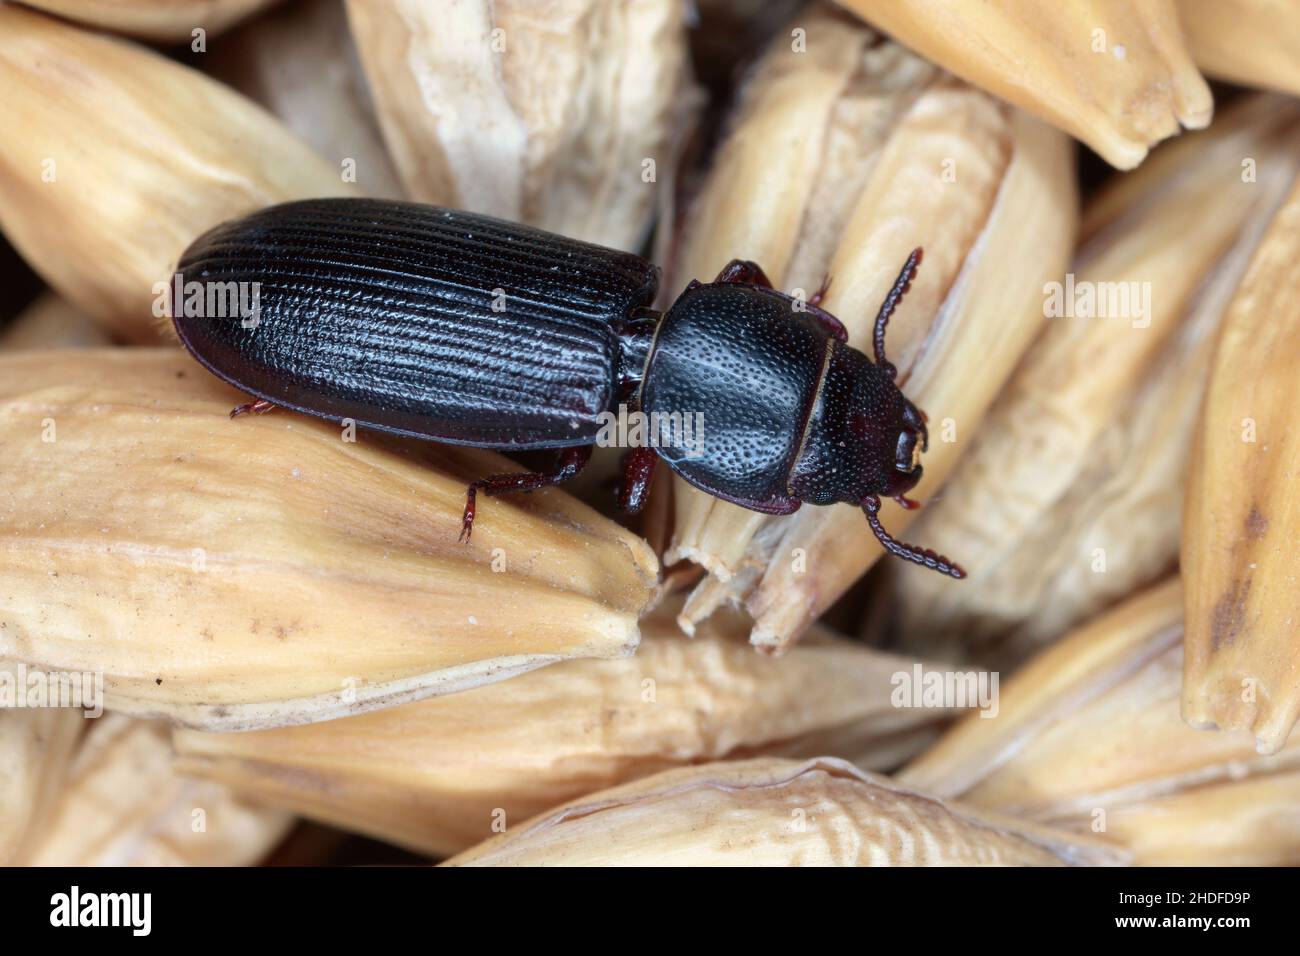 The cadelle beetle Tenebroides mauritanicus beetle from the family Trogossitidae on grain. Stock Photo